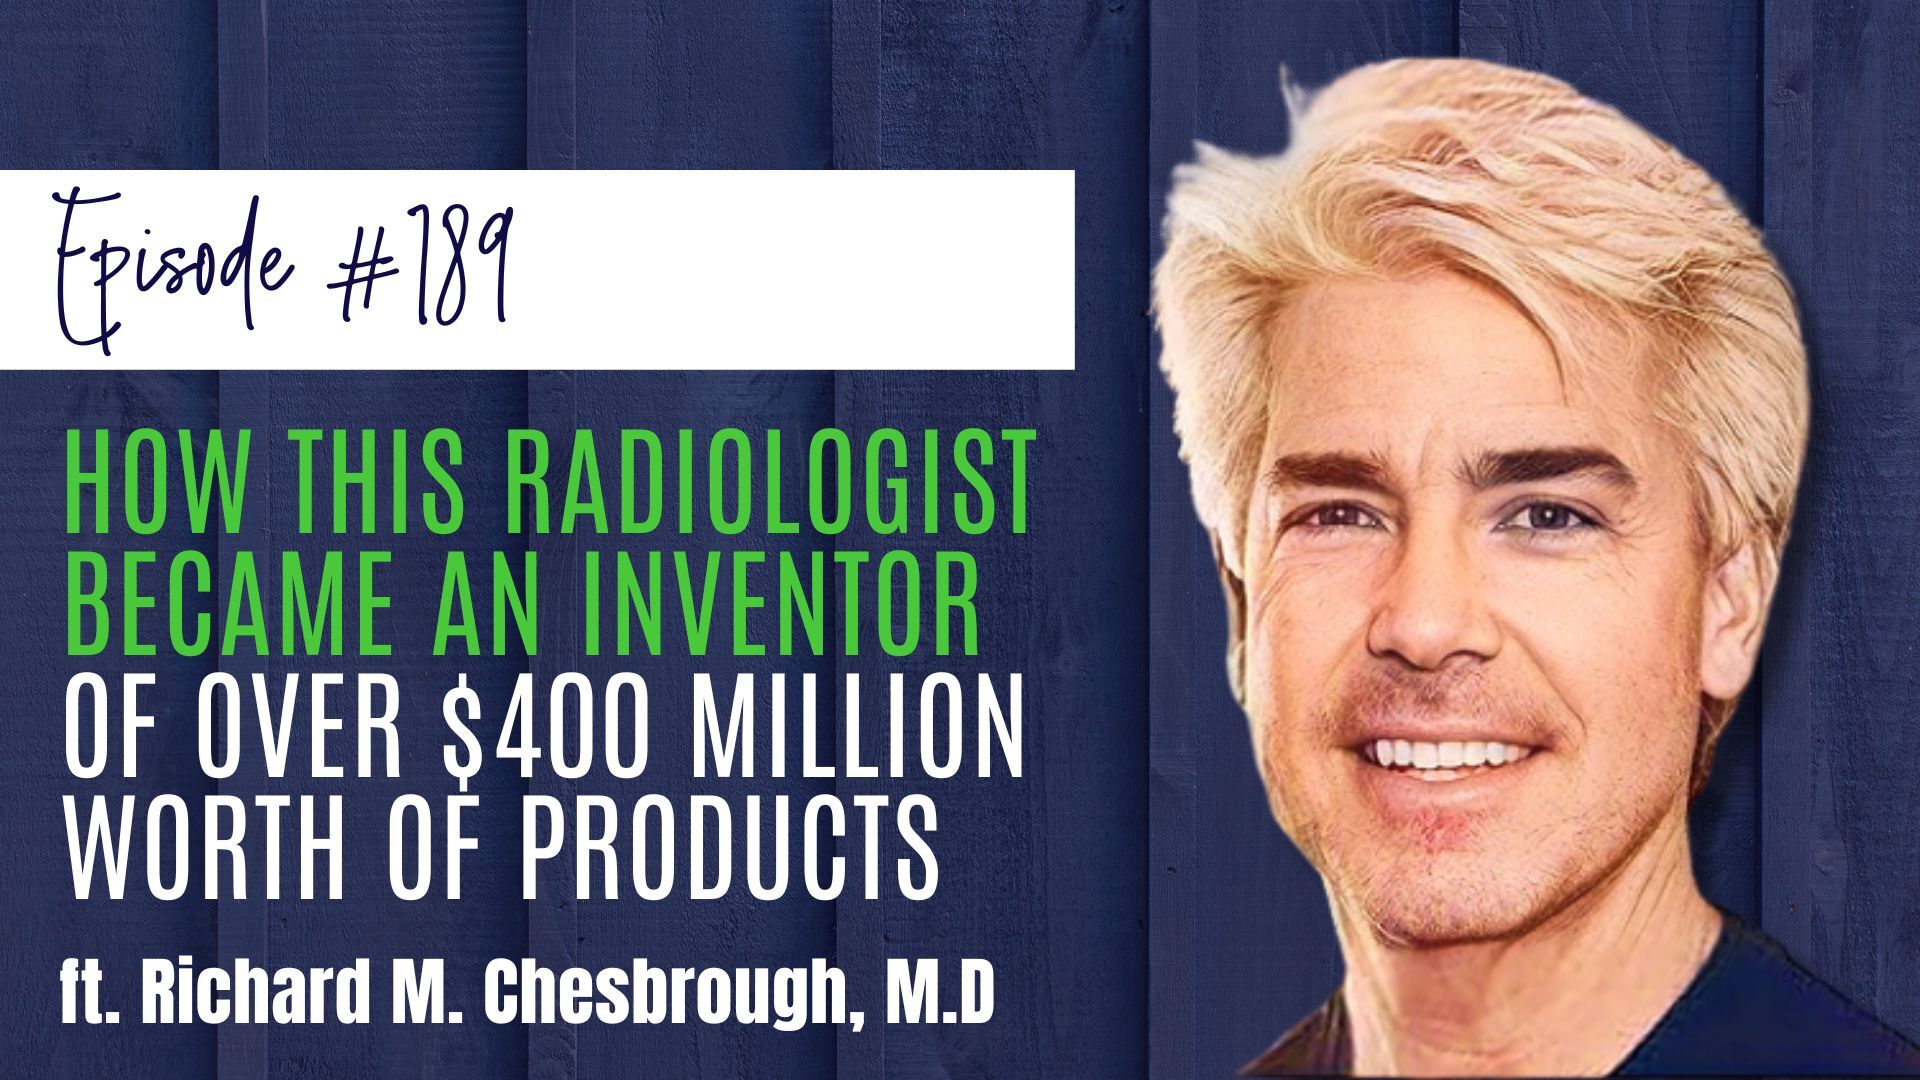 #189 How This Radiologist Became an Inventor of Over $400 Million Worth of Products ft. Richard M. Chesbrough, M.D